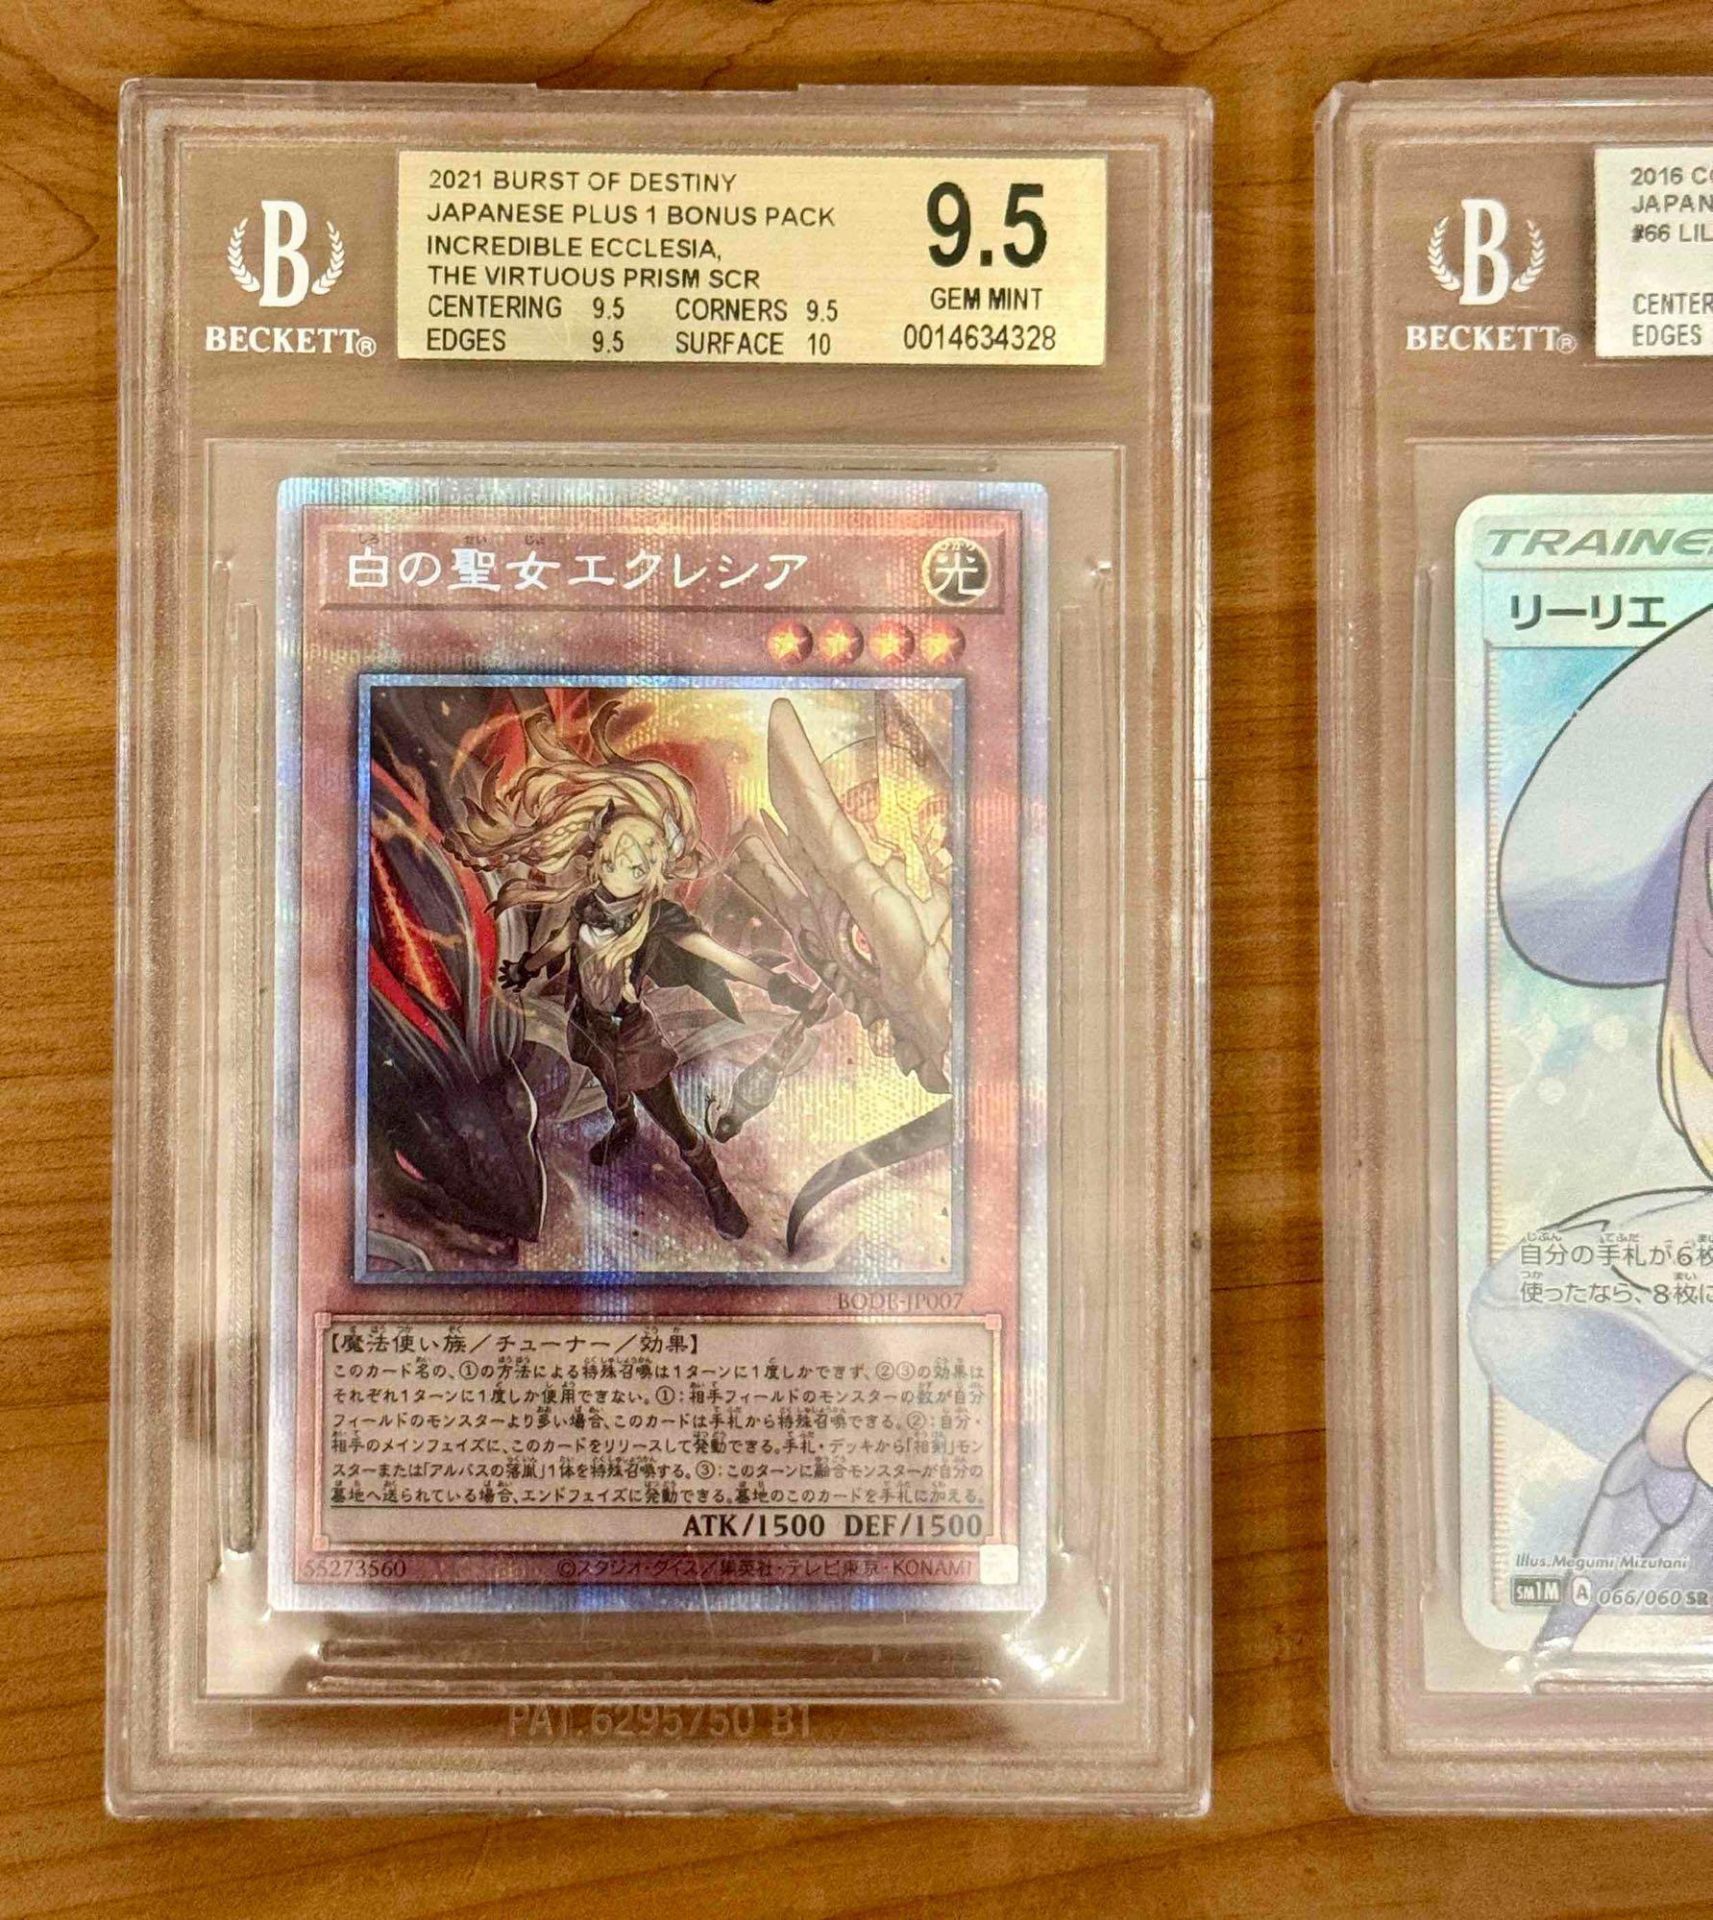 Two Graded Cards: 2021 Burst of Destiny Japanese Plus 1 Bonus Pack 9.5 Gem The Virtuous Prism and 20 - Image 2 of 4